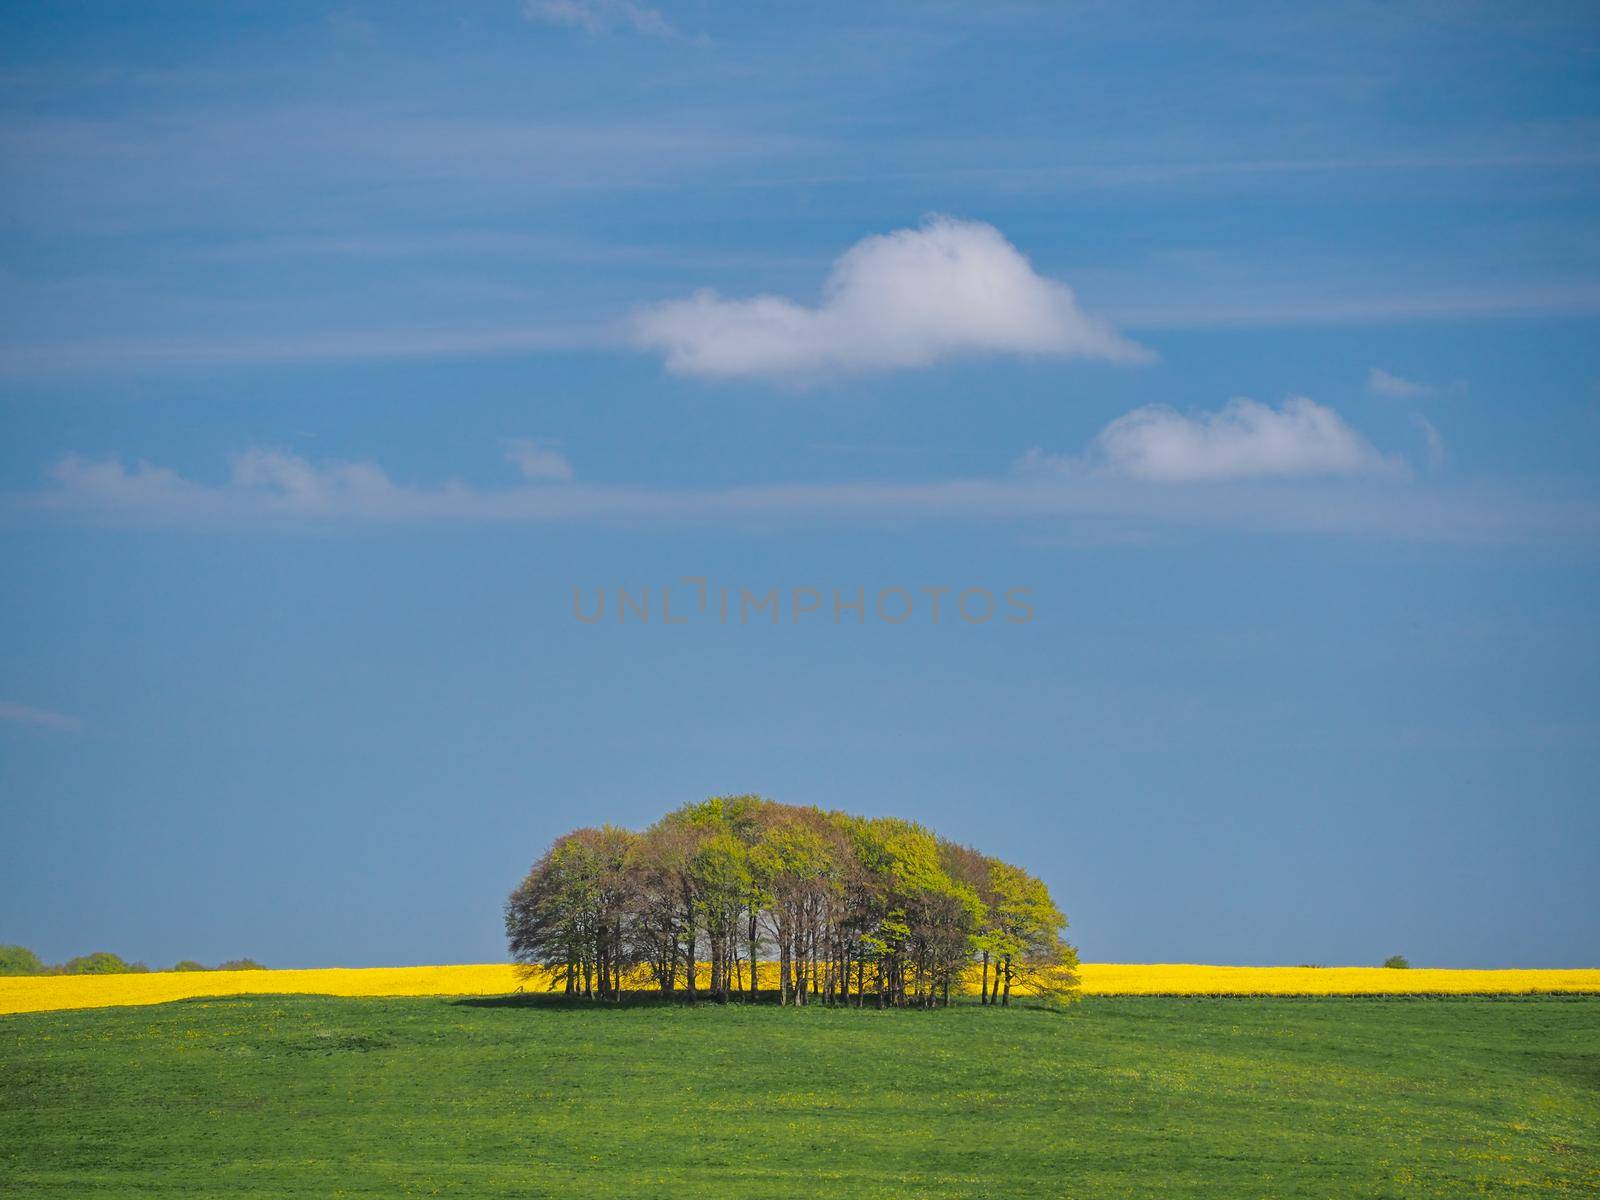 Springtime view of green fields, trees and yellow rapeseed, Avebury, Wiltshire by PhilHarland